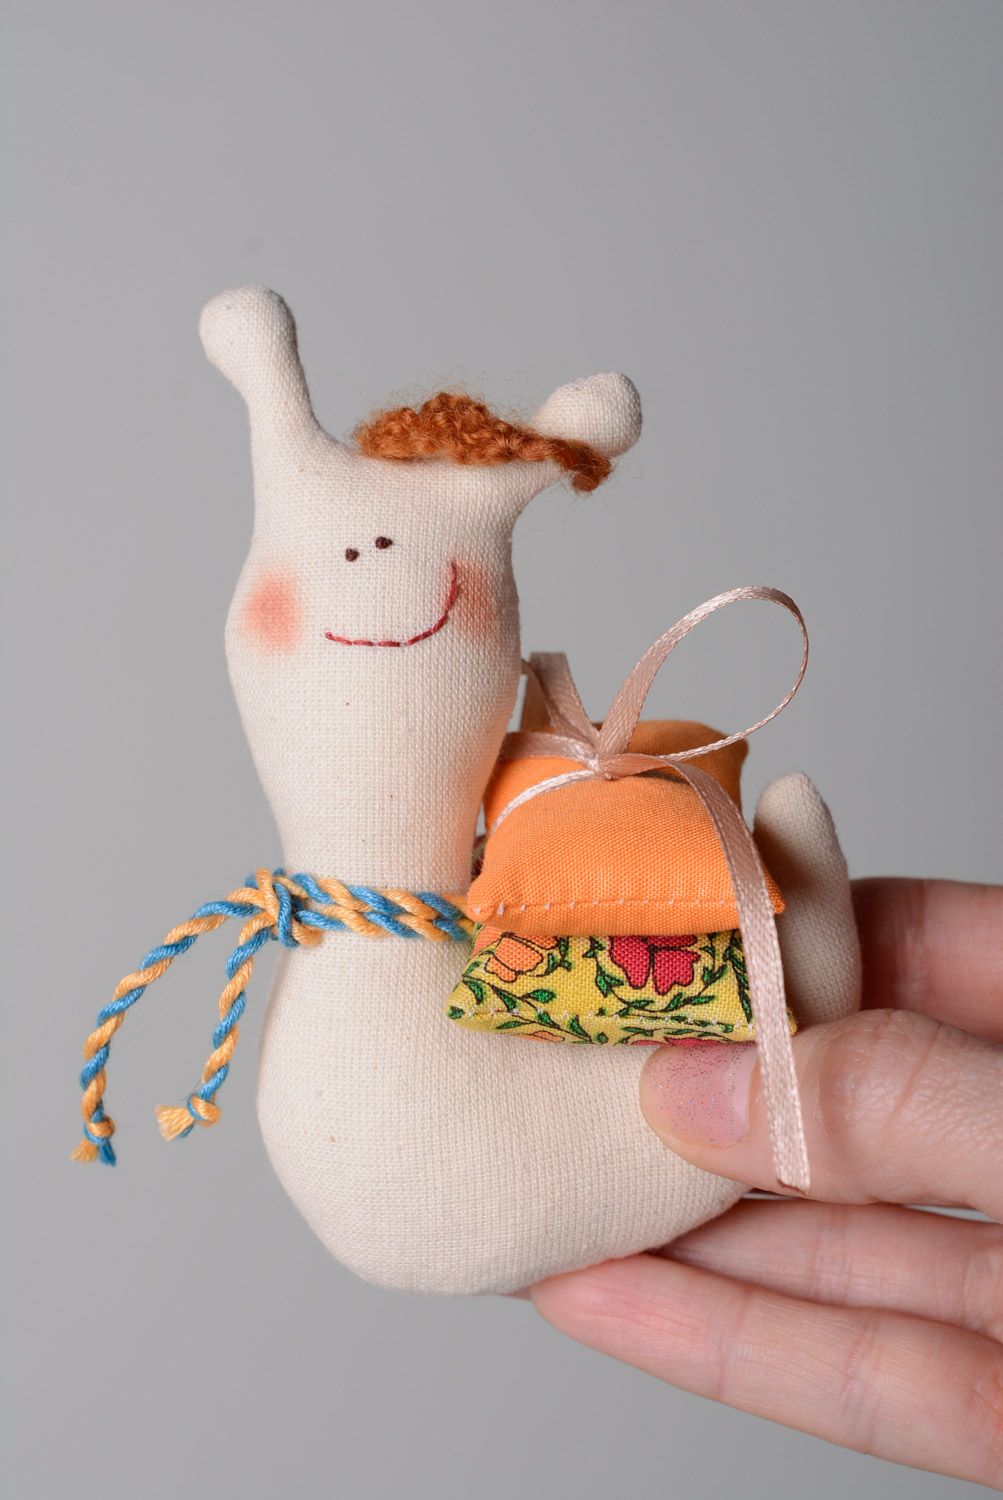 Small handmade designer soft toy sewn of natural fabrics in the shape of snail photo 3